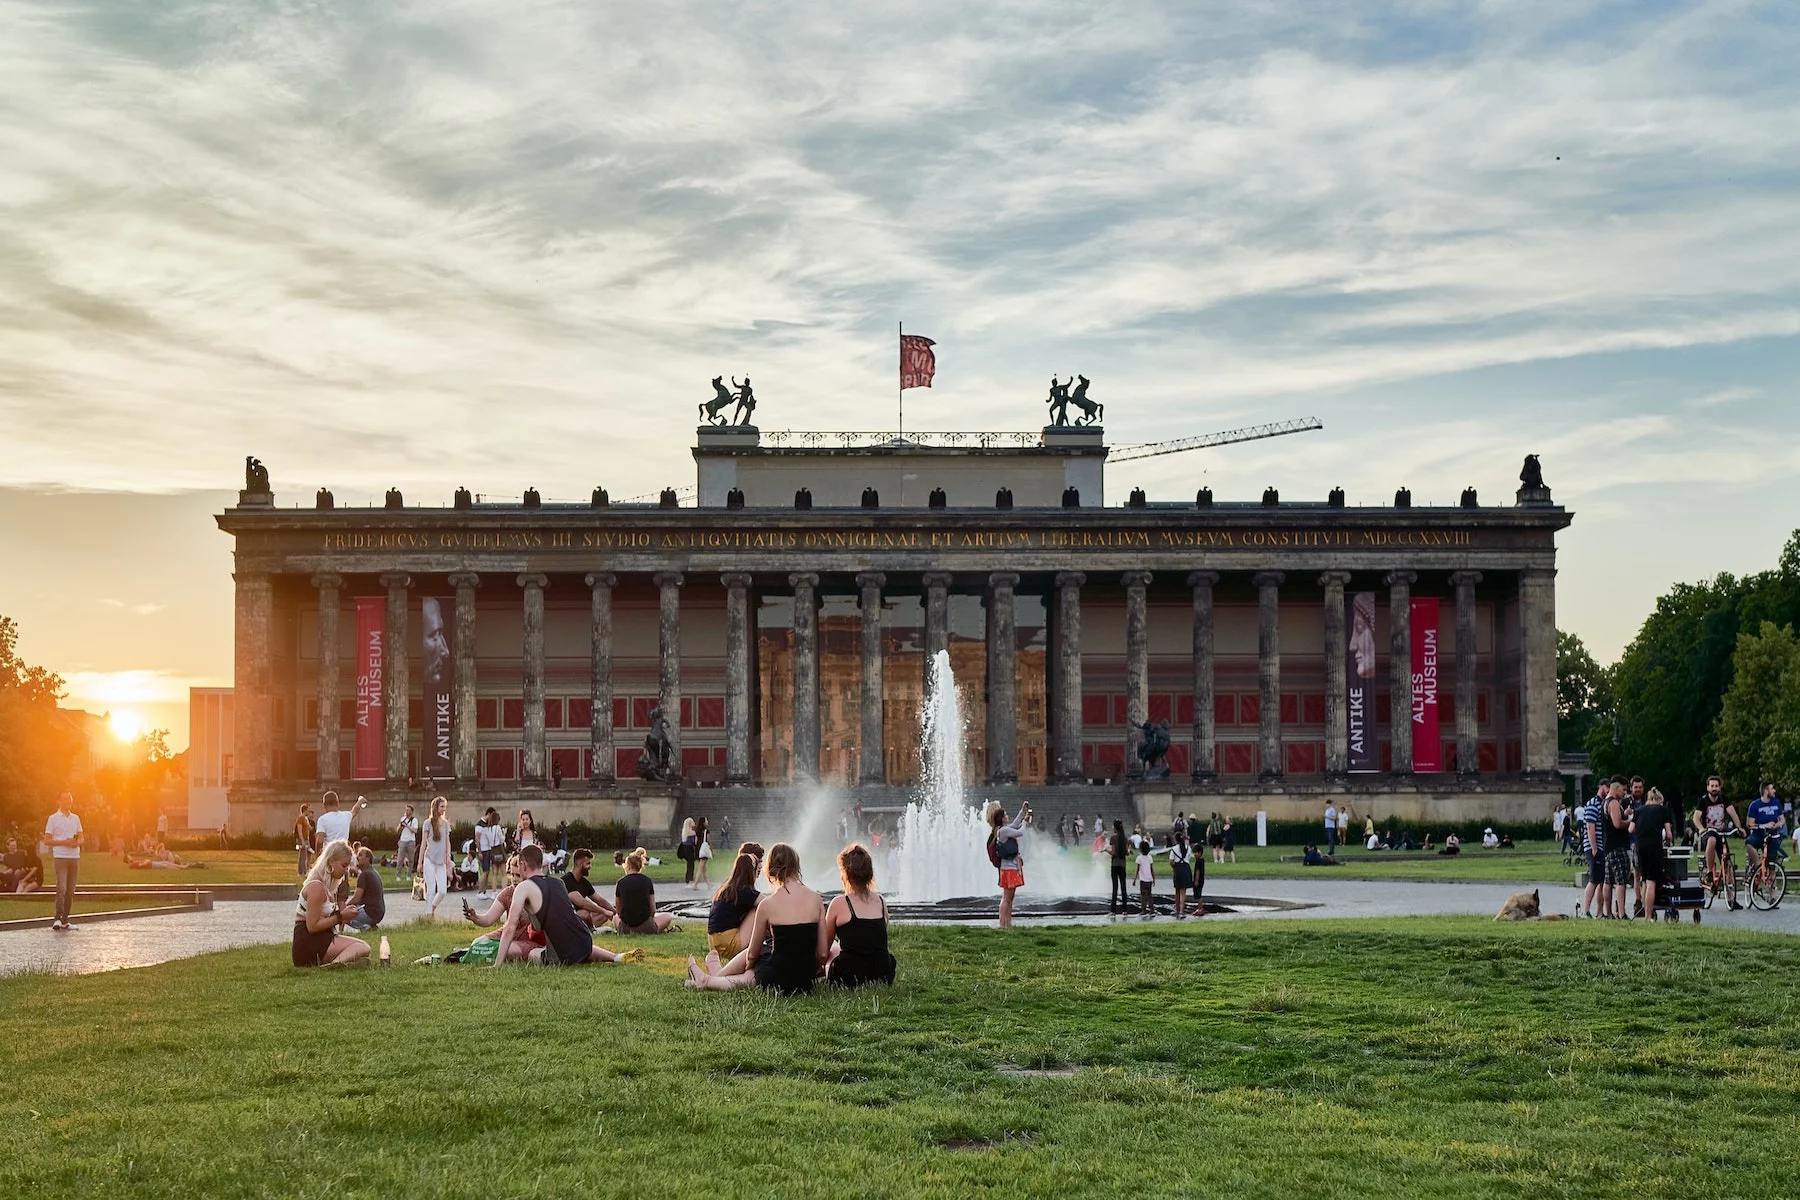 Altes Museum in Berlin at sunset, with many people sitting on the lawn